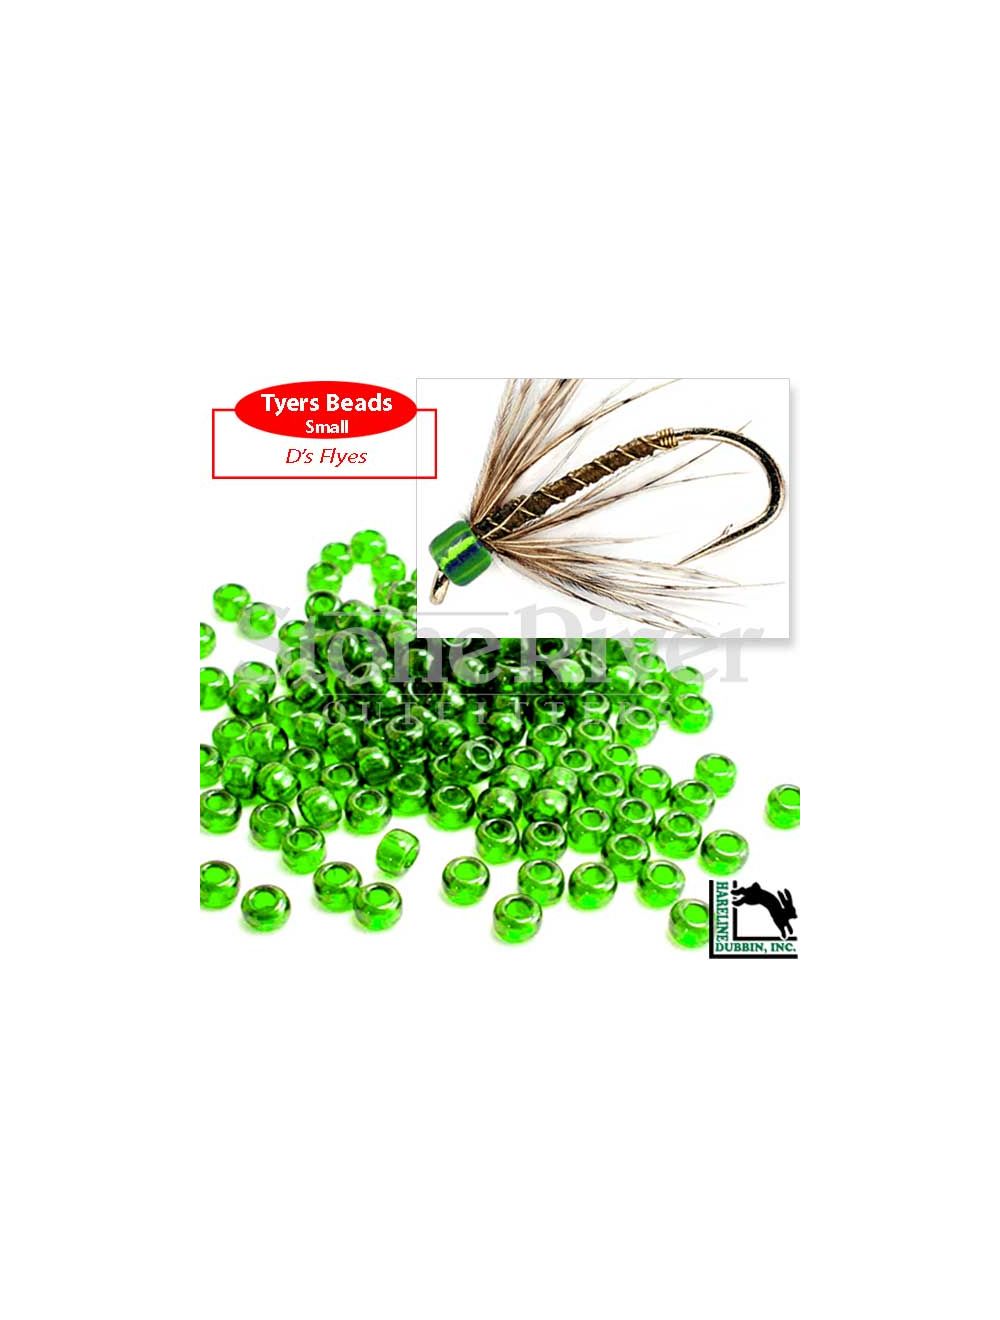 All Varieties Hareline Tyers Glass Beads Fly Tying Materials 